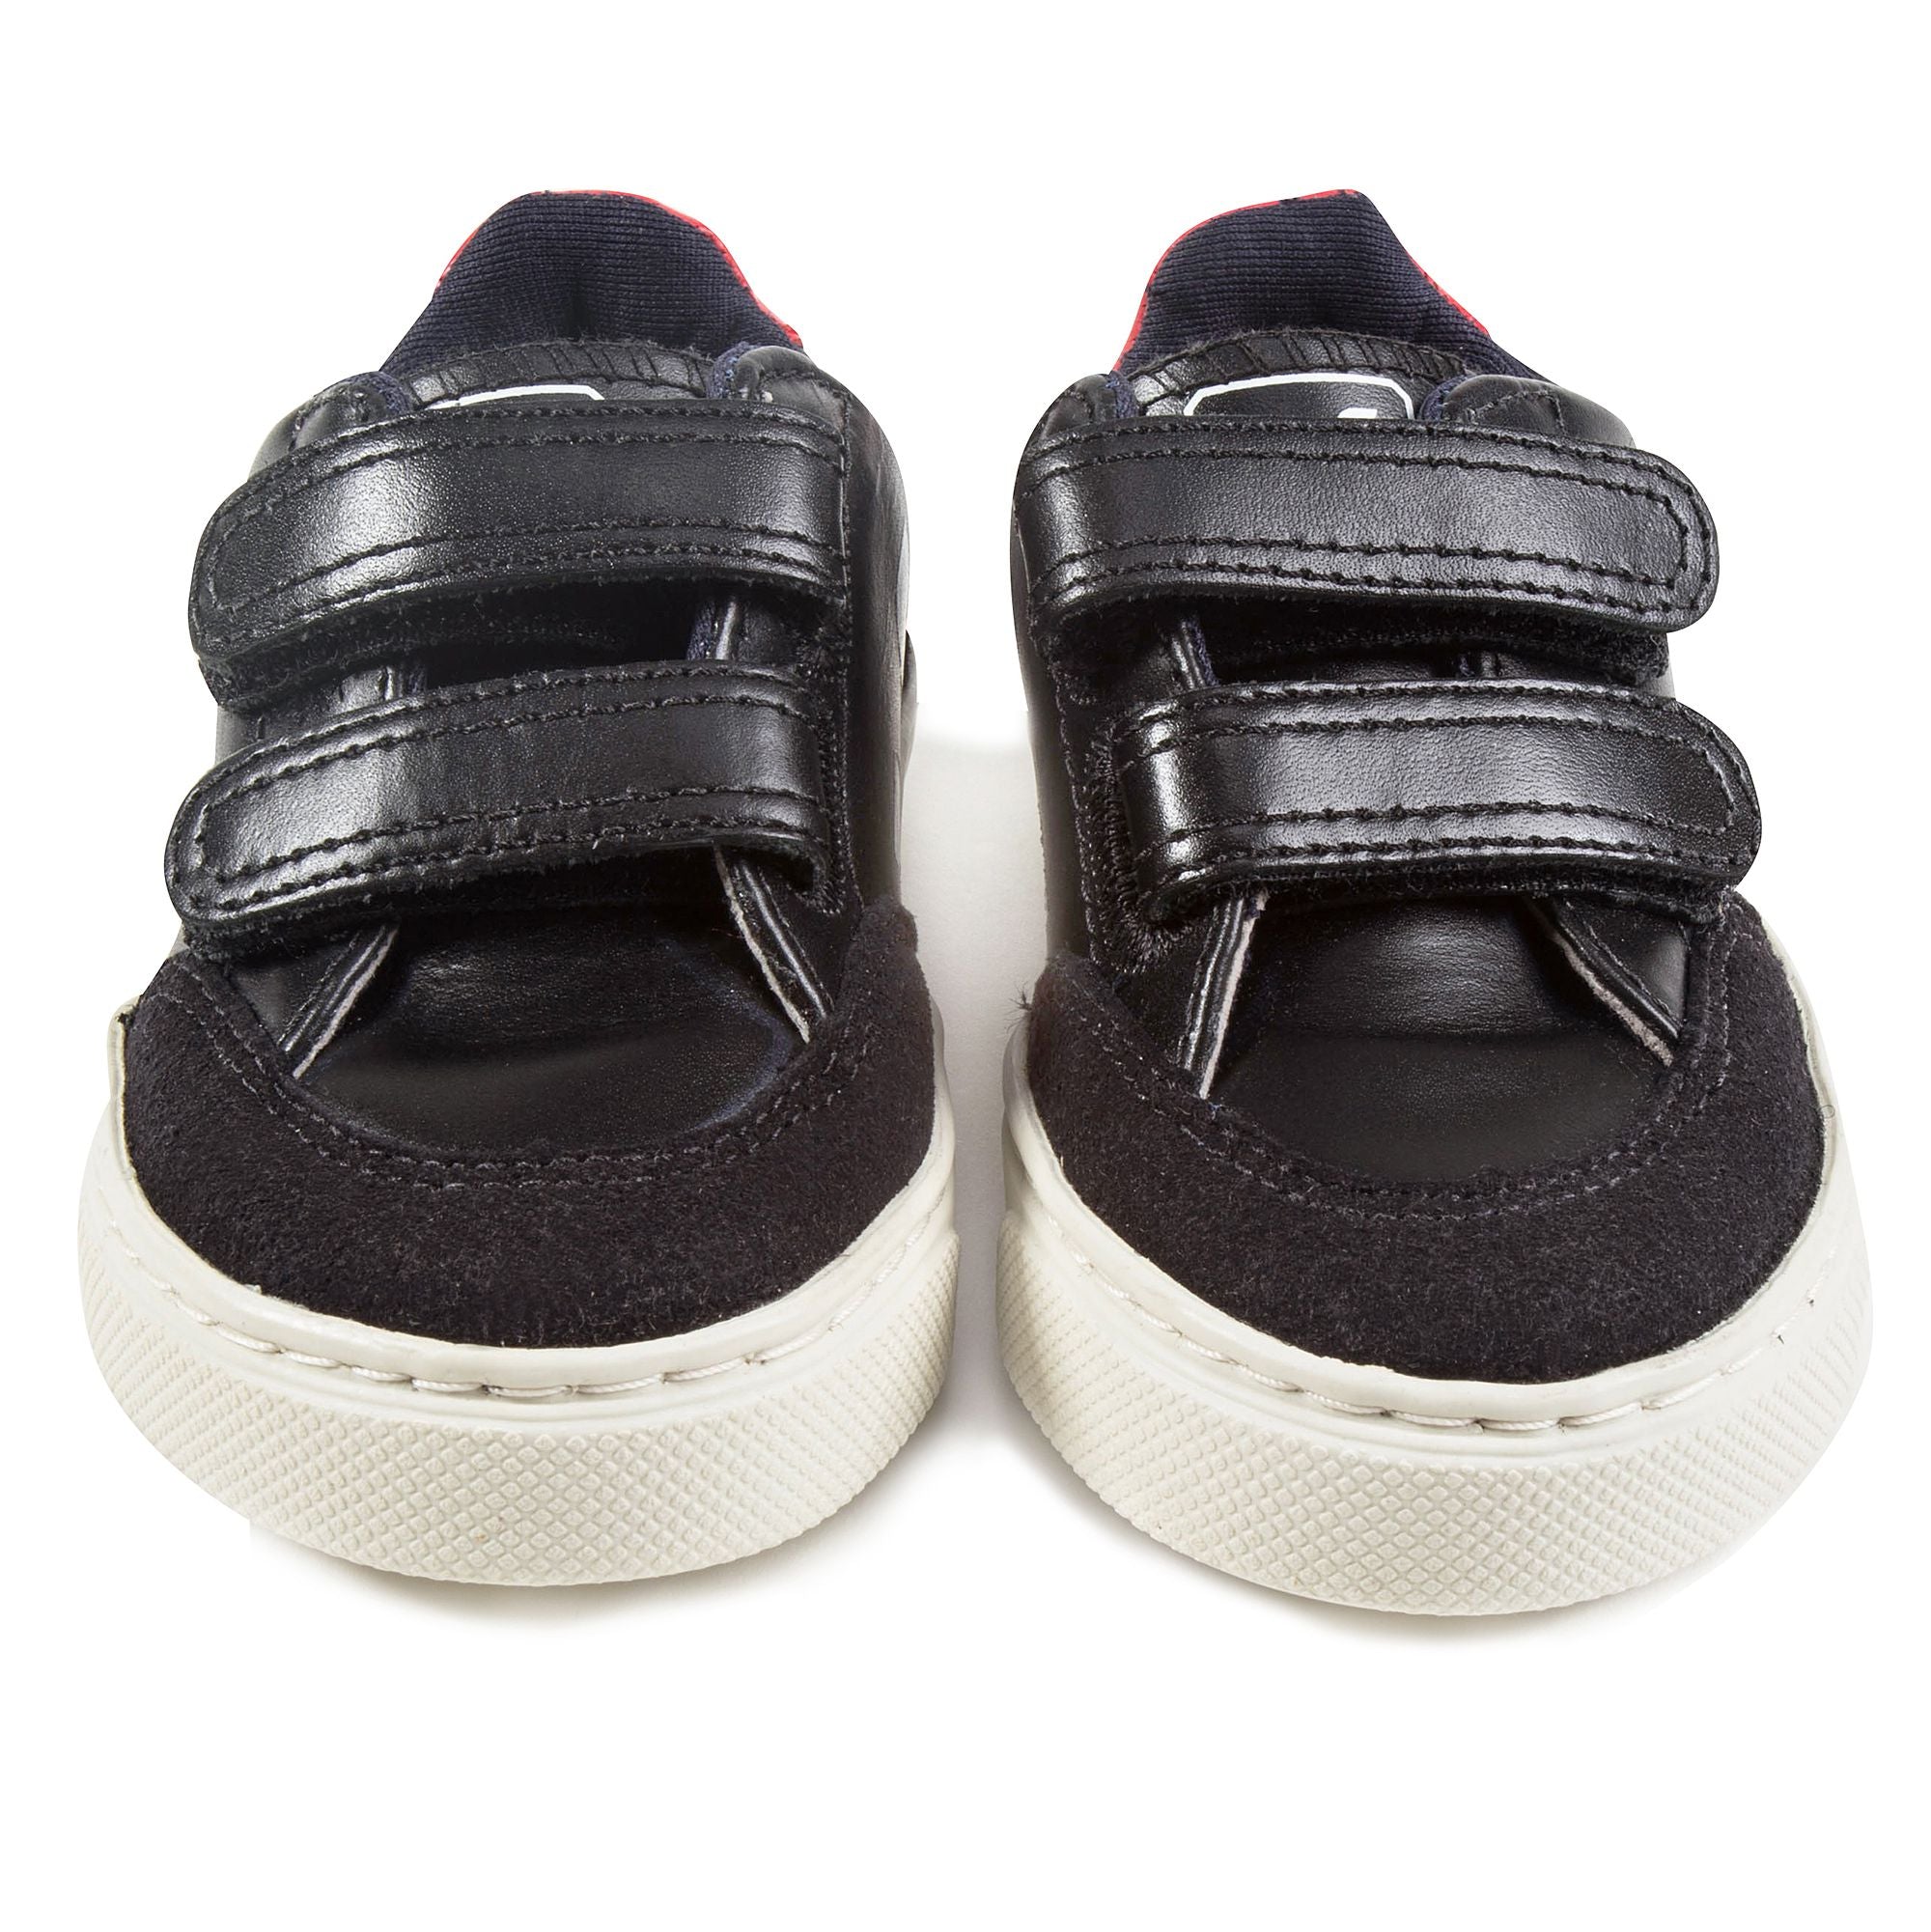 Boys  Navy  Blue   Leather Velcro   With   Red  "V" Shoes